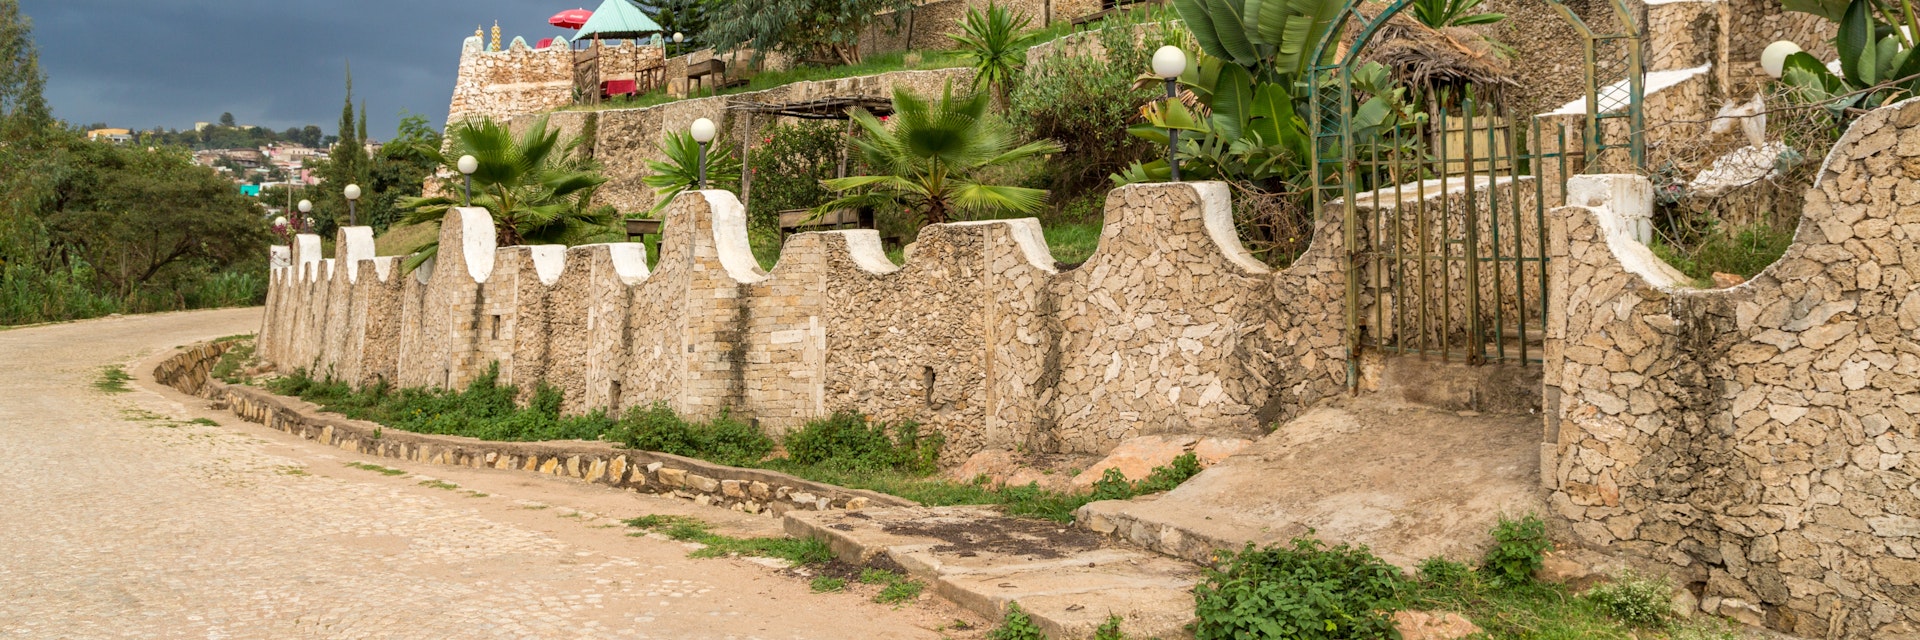 The walls of the fortified historic city Jugol, Ethiopia